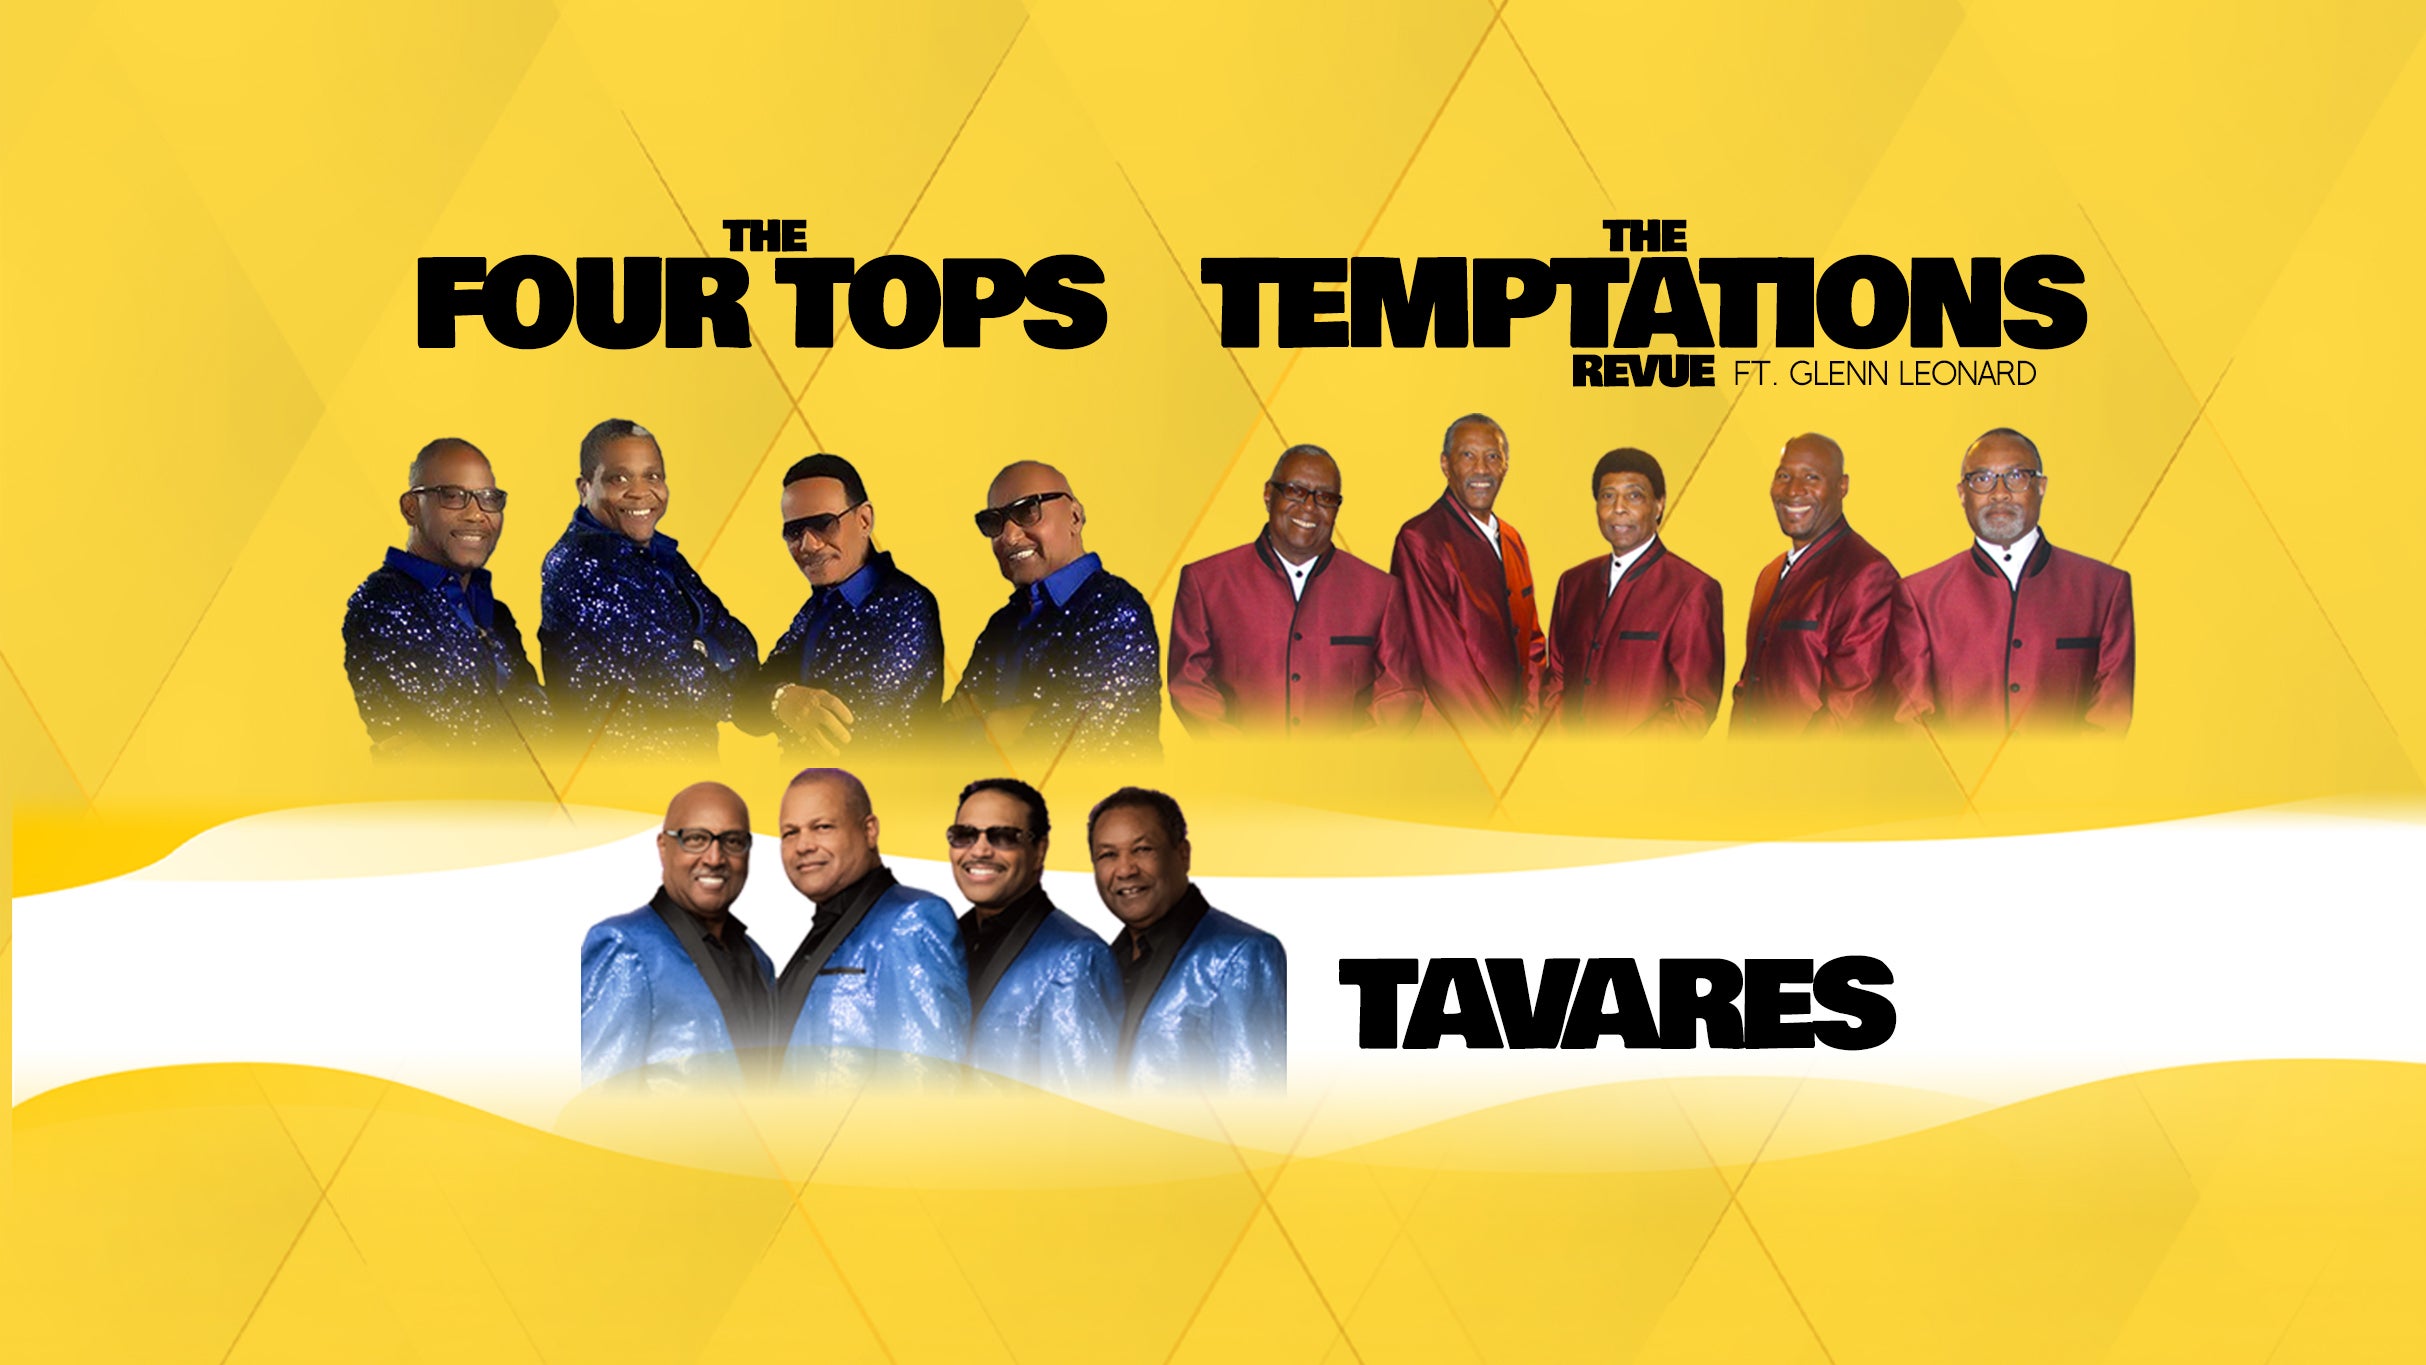 The Four Tops/ The Temptations revue ft. Glen Leonard/ Tavares pre-sale code for musical tickets in Liverpool,  (M&S Bank Arena Liverpool)